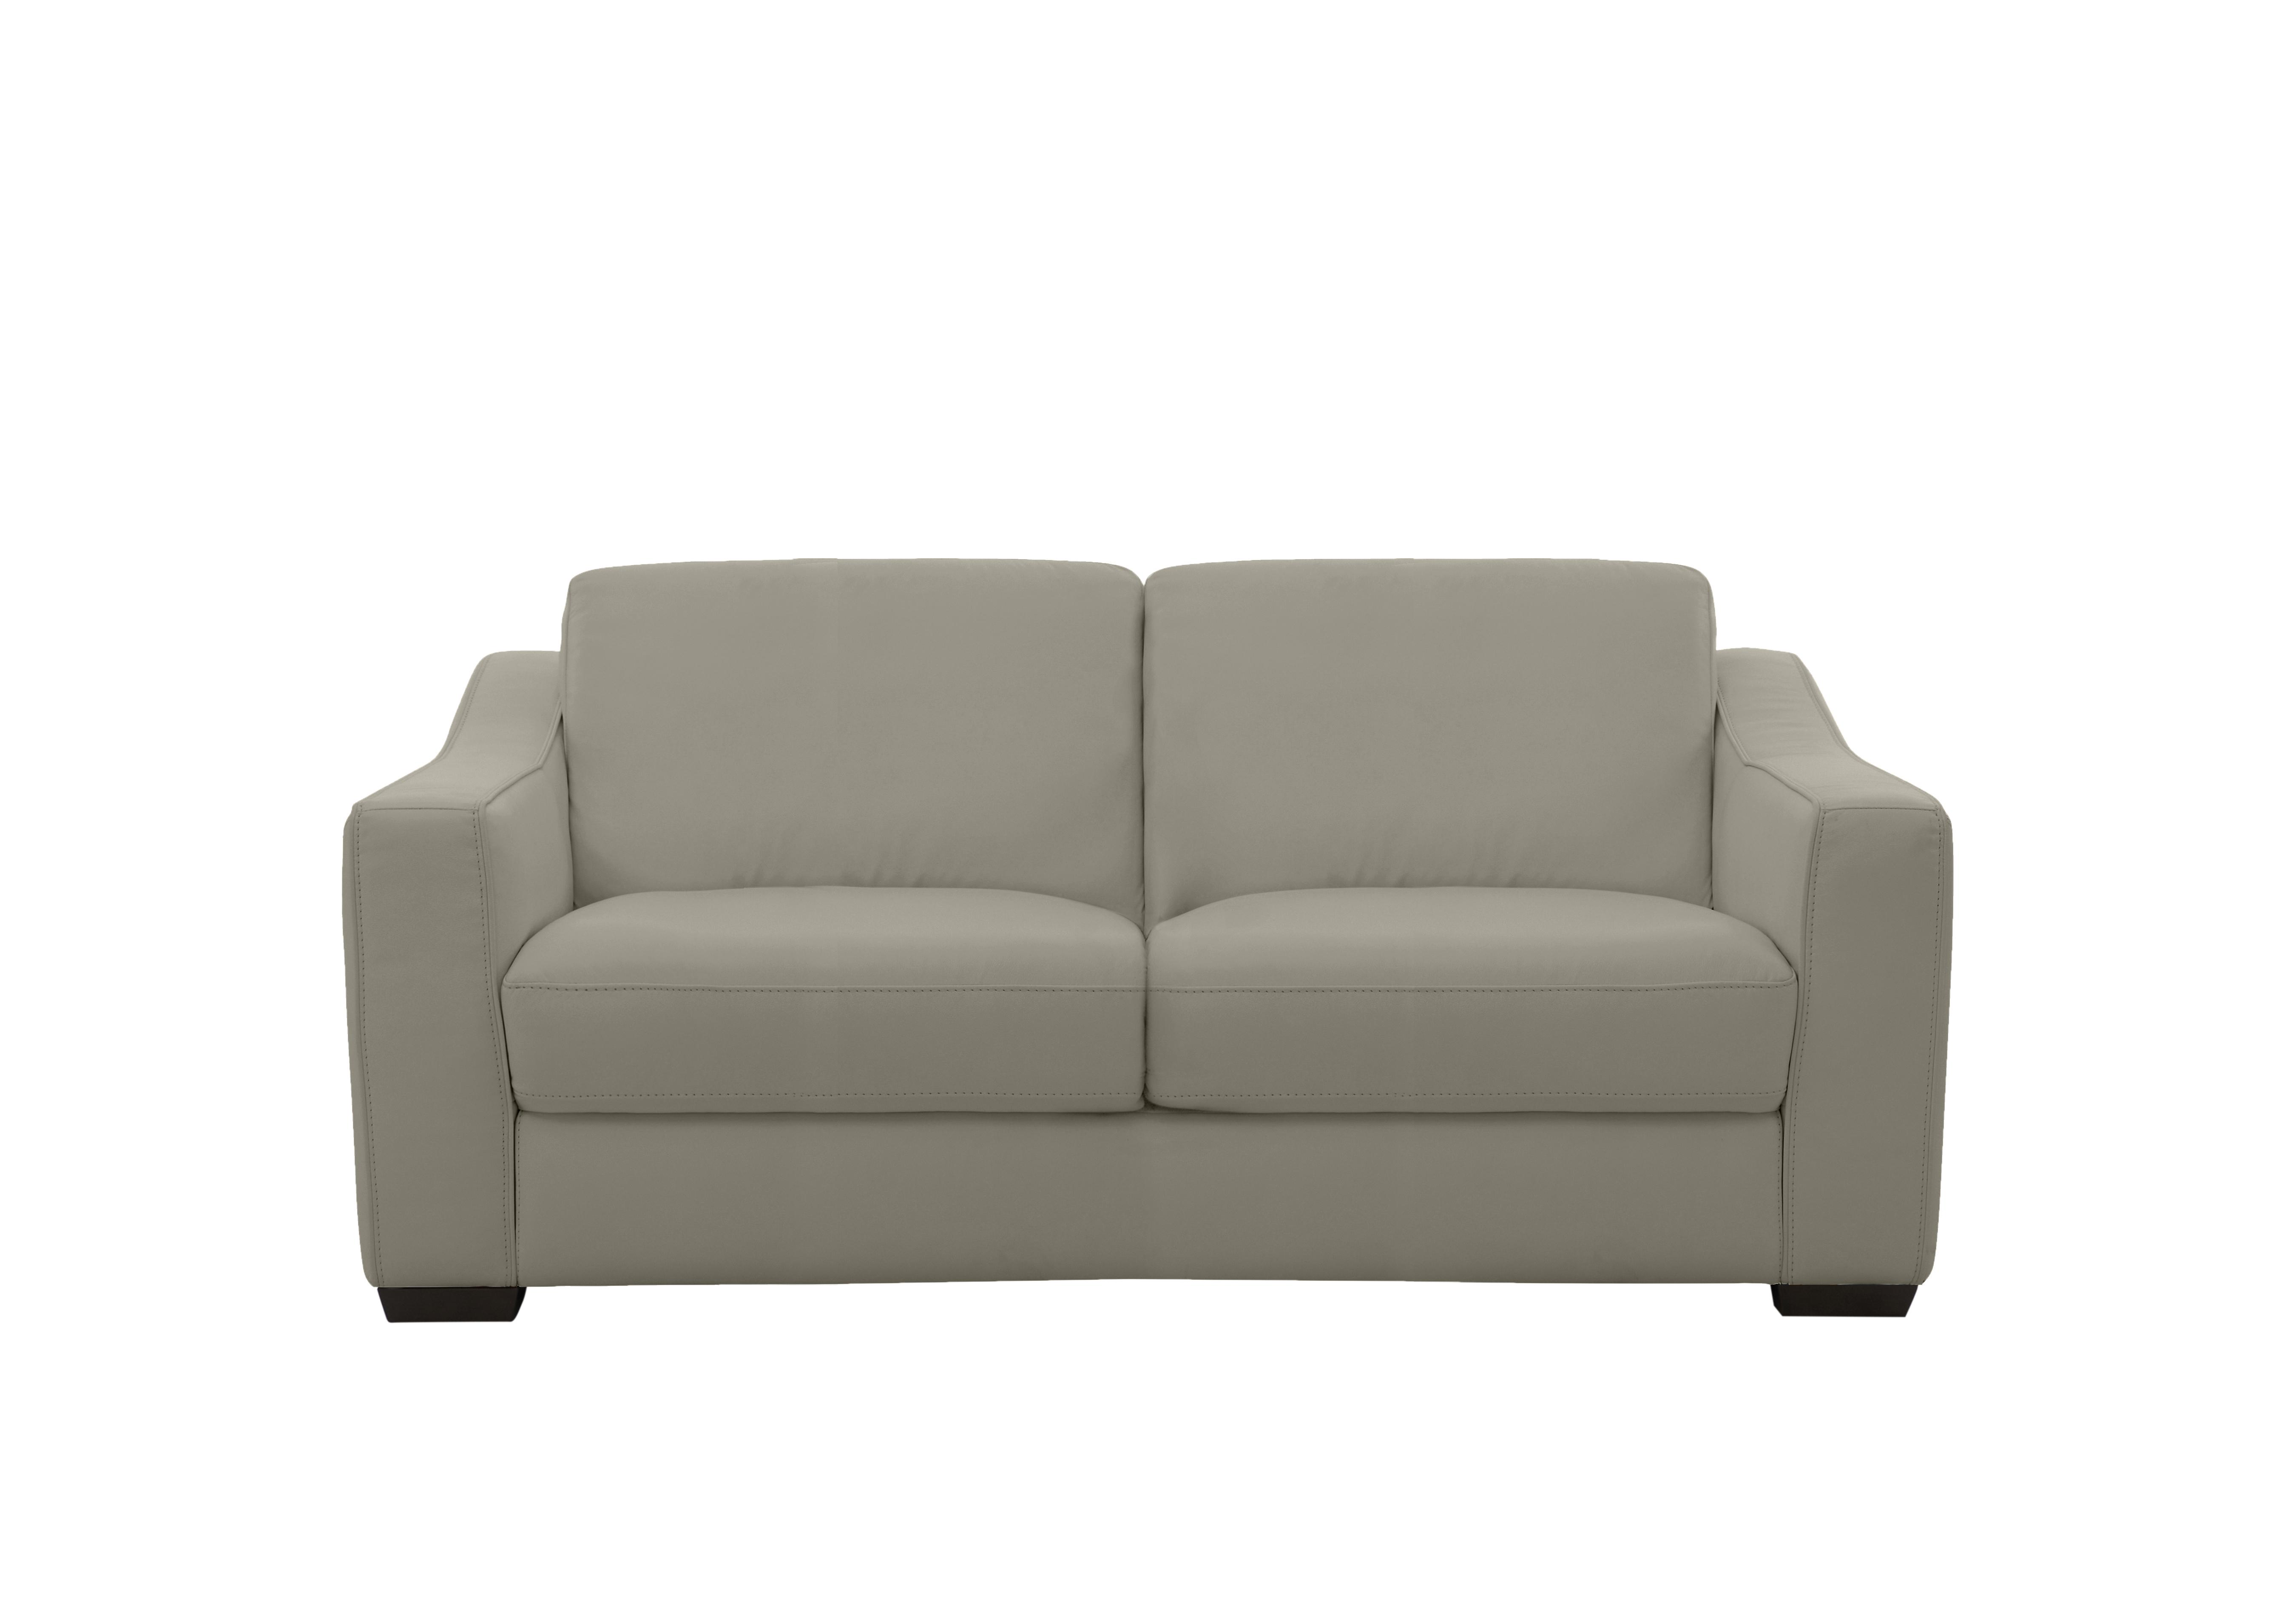 Optimus 2 Seater Leather Sofa in Bv-946b Silver Grey on Furniture Village